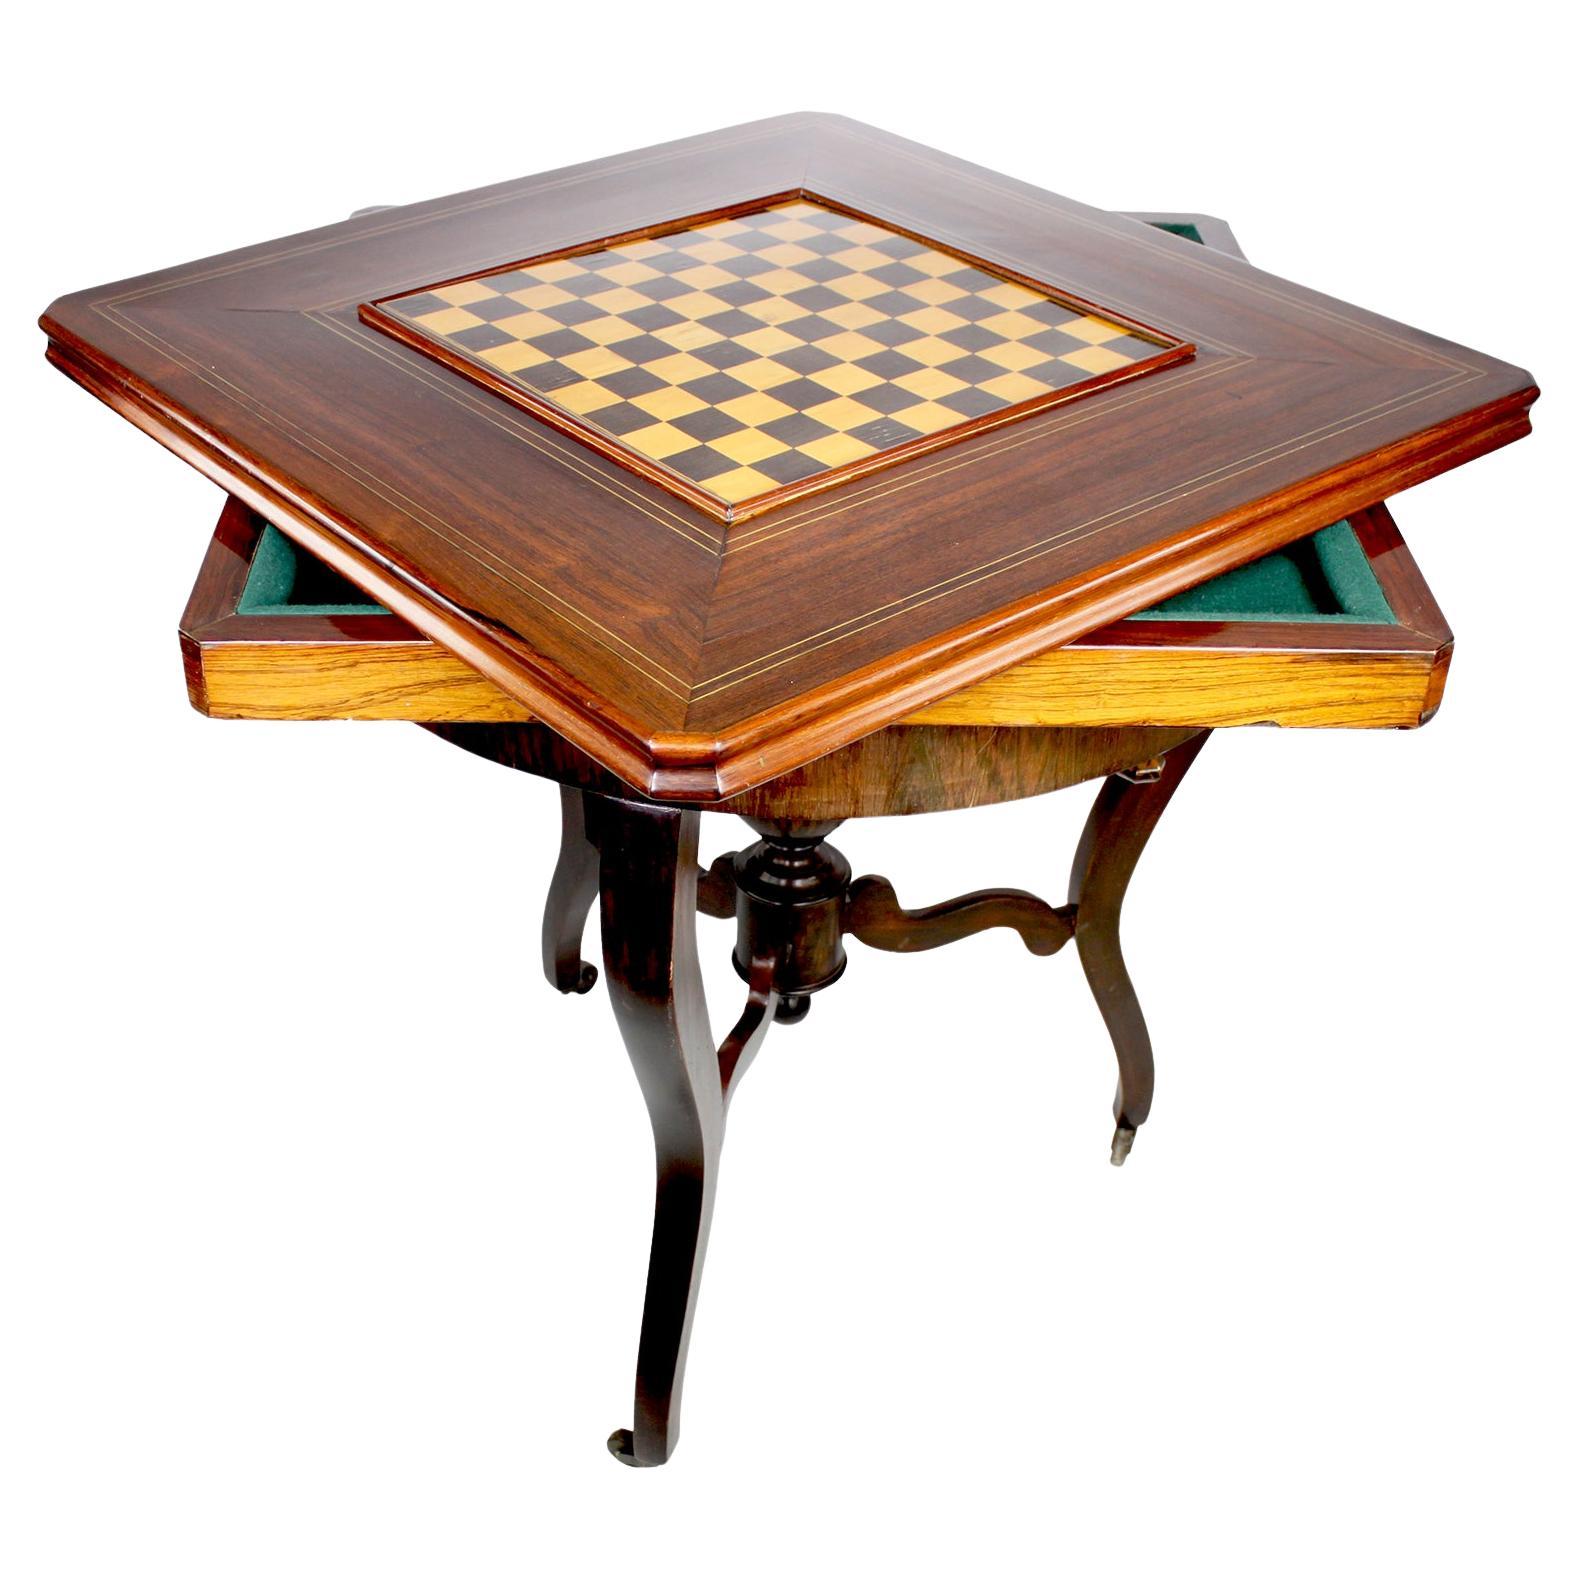 What is a carom table?